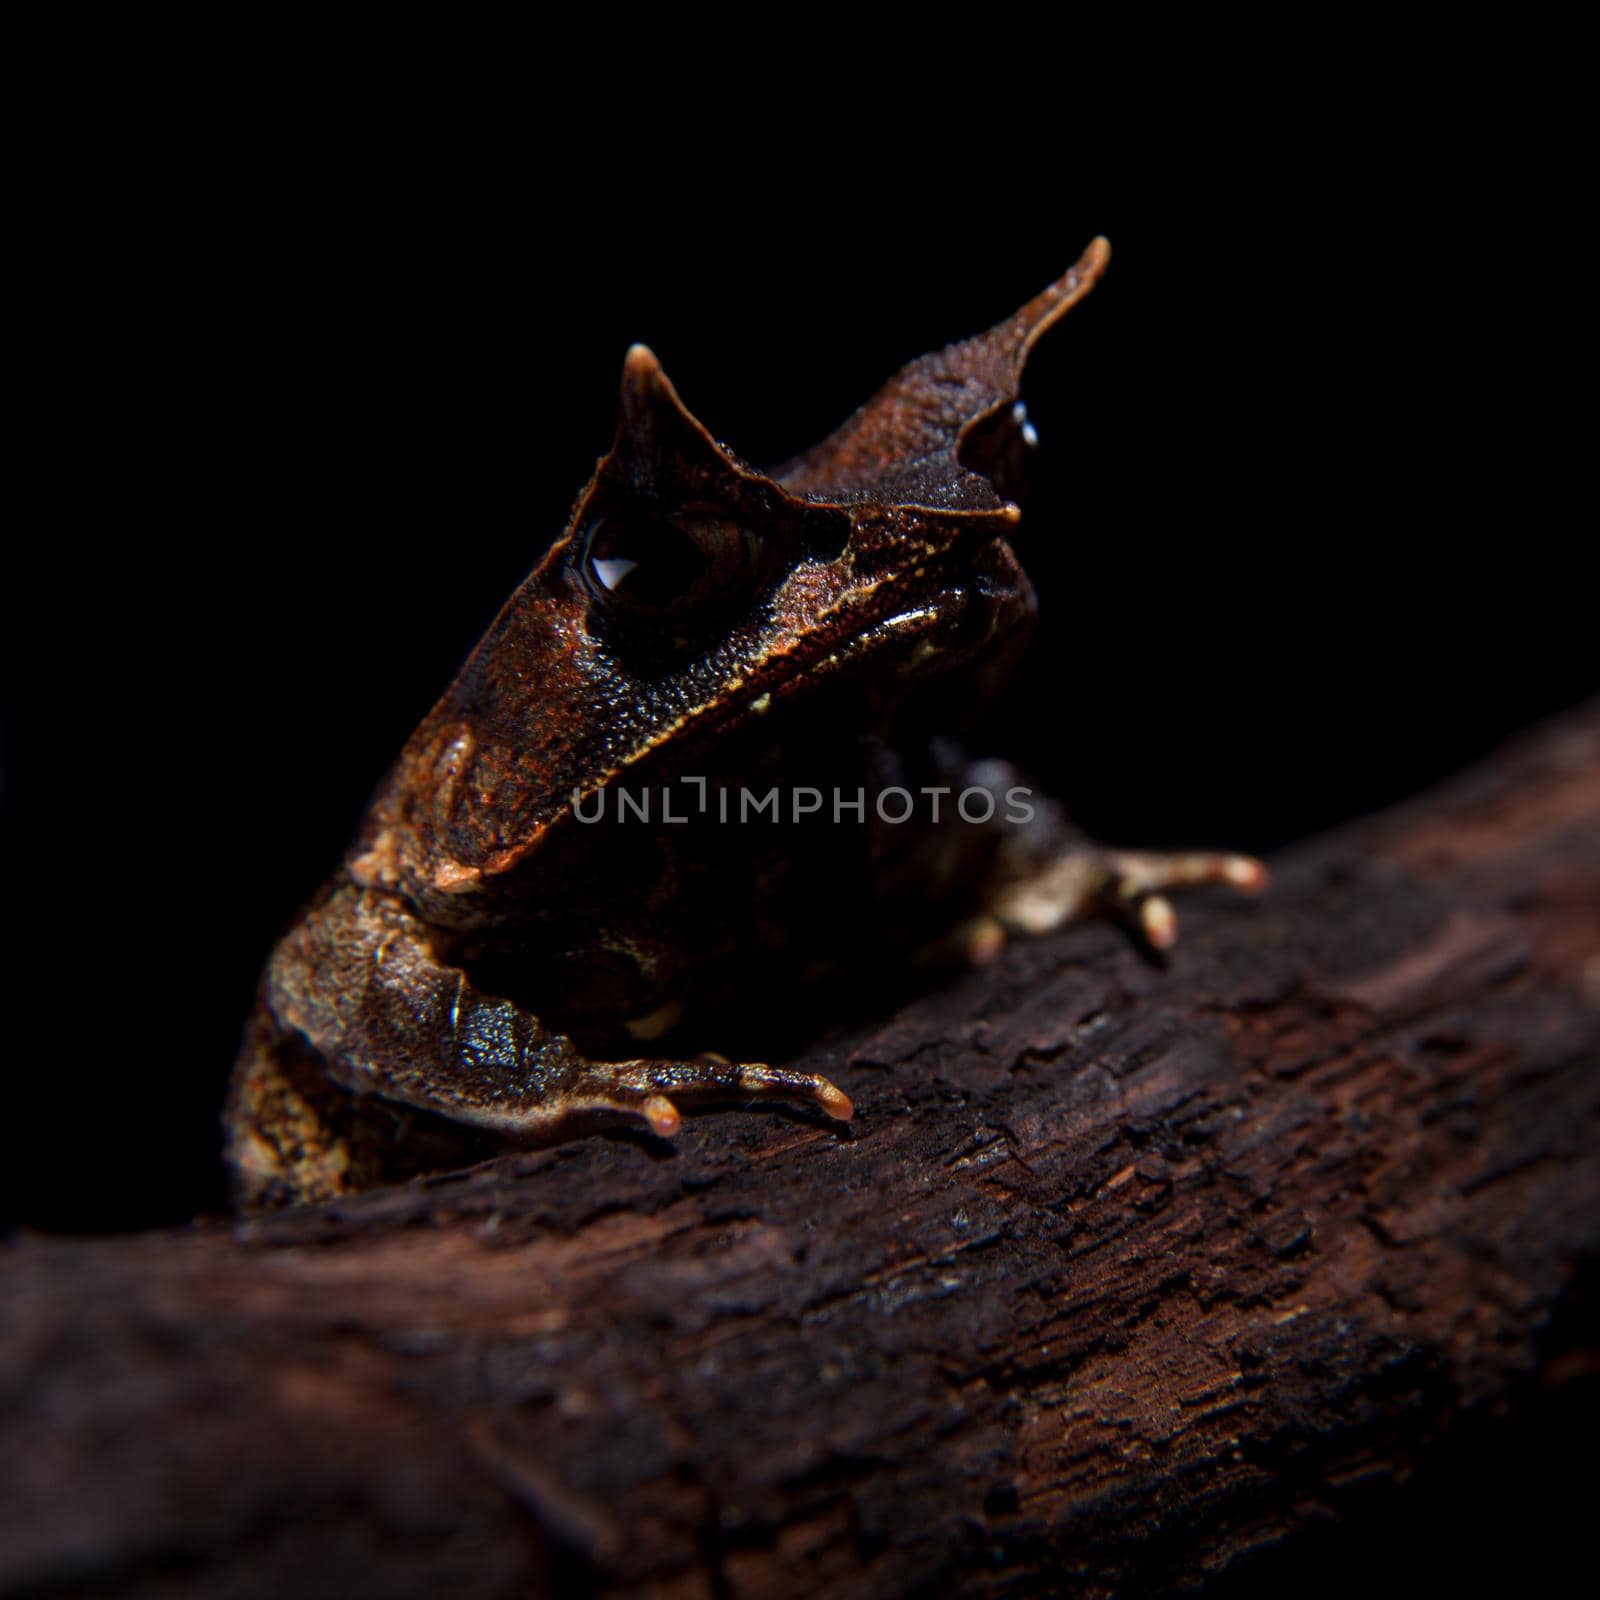 The long-nosed horned frog isolated on black background